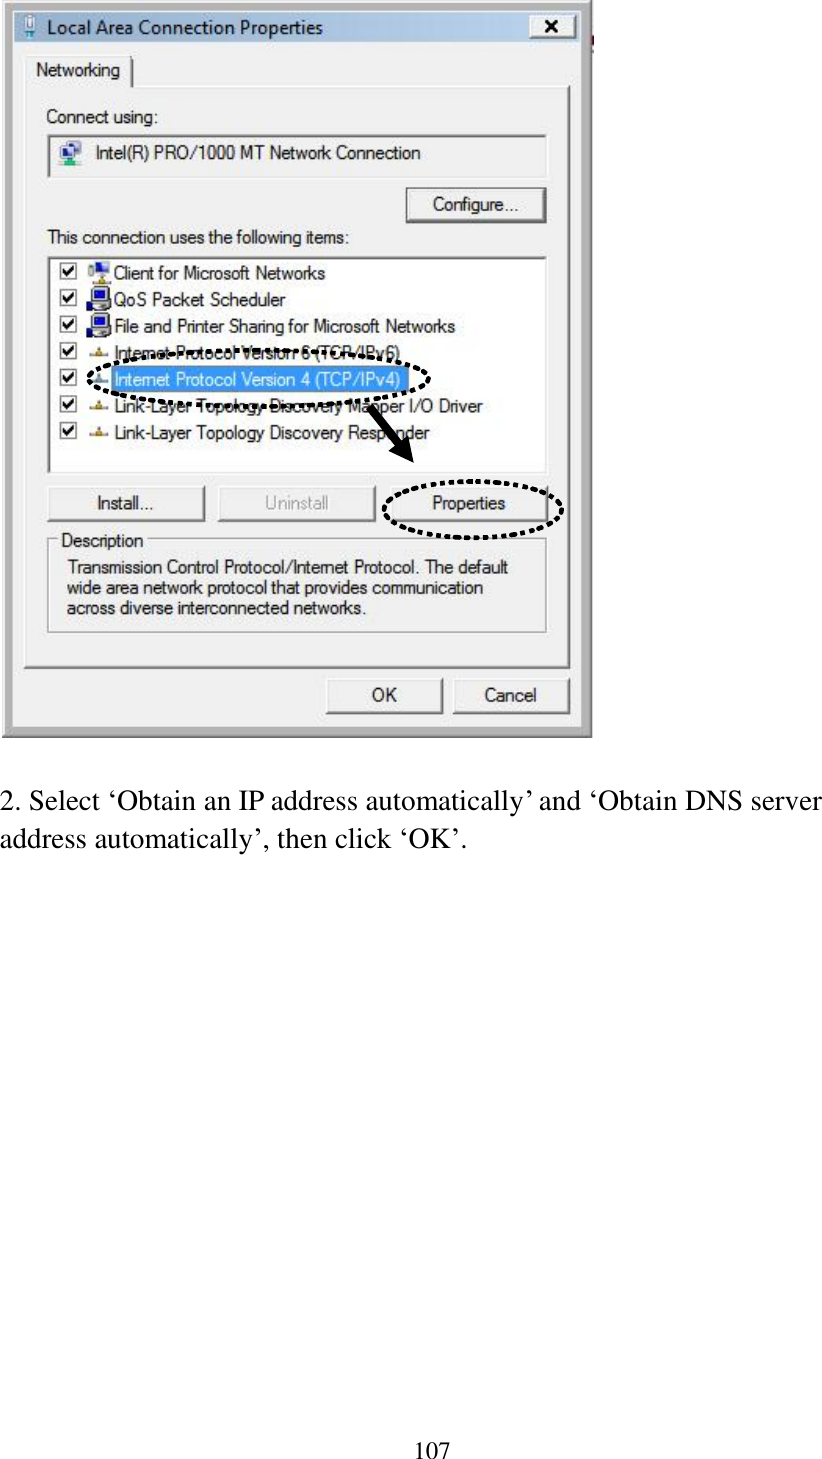 107    2. Select „Obtain an IP address automatically‟ and „Obtain DNS server address automatically‟, then click „OK‟.  